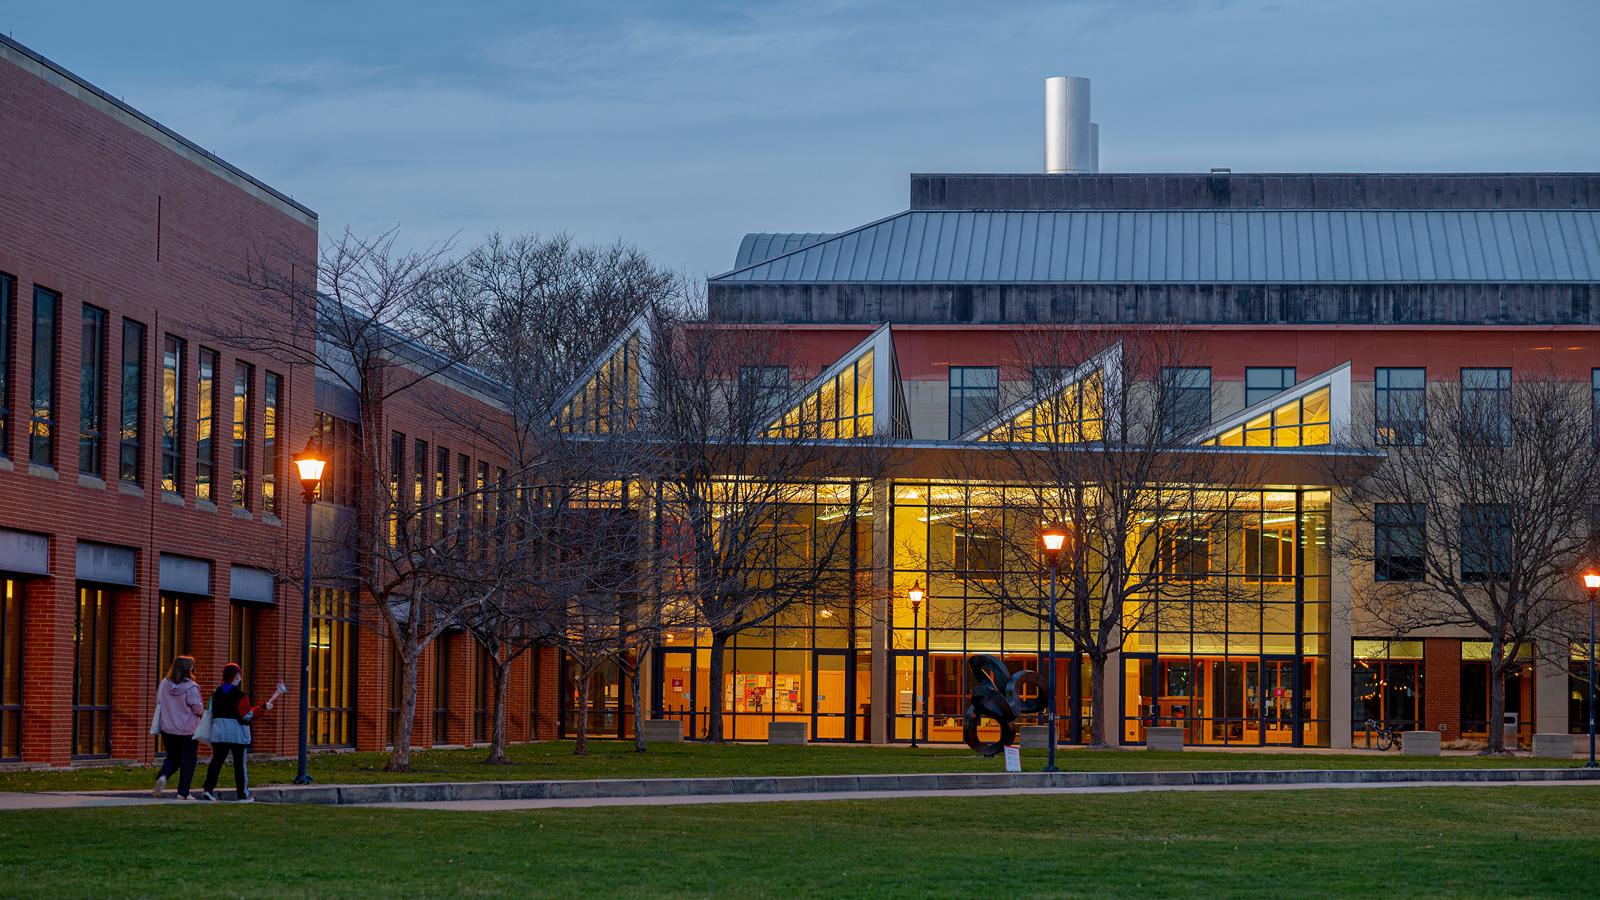 The science center at dusk.